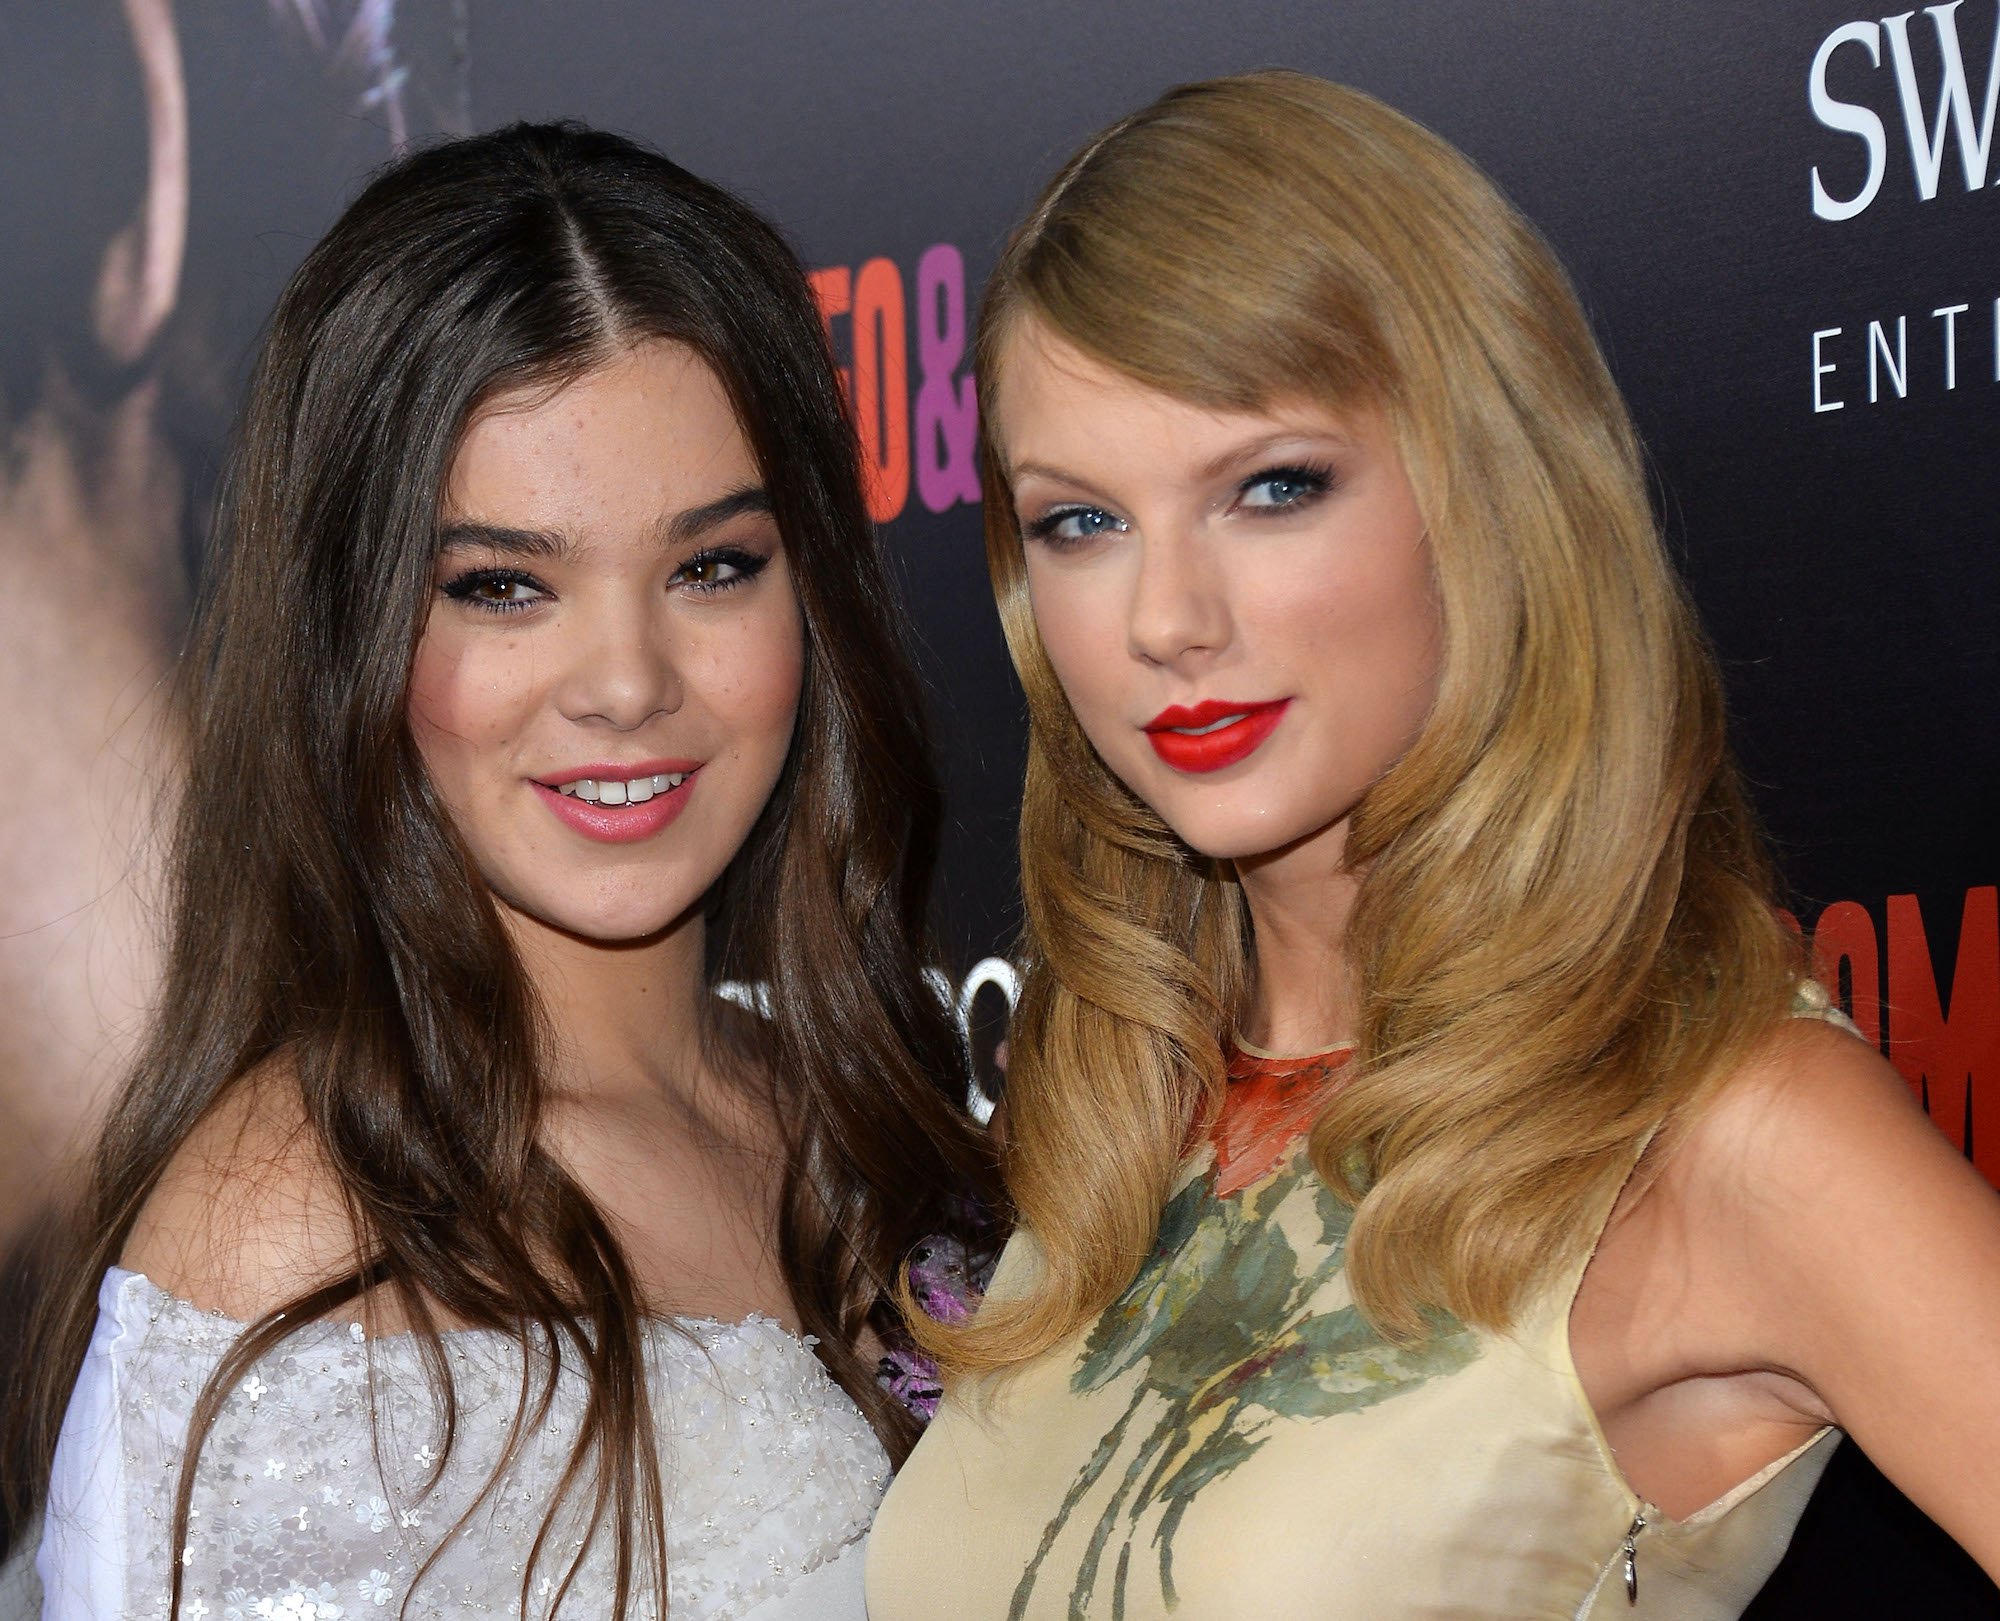 Hailee Steinfeld and Taylor Swift smiling